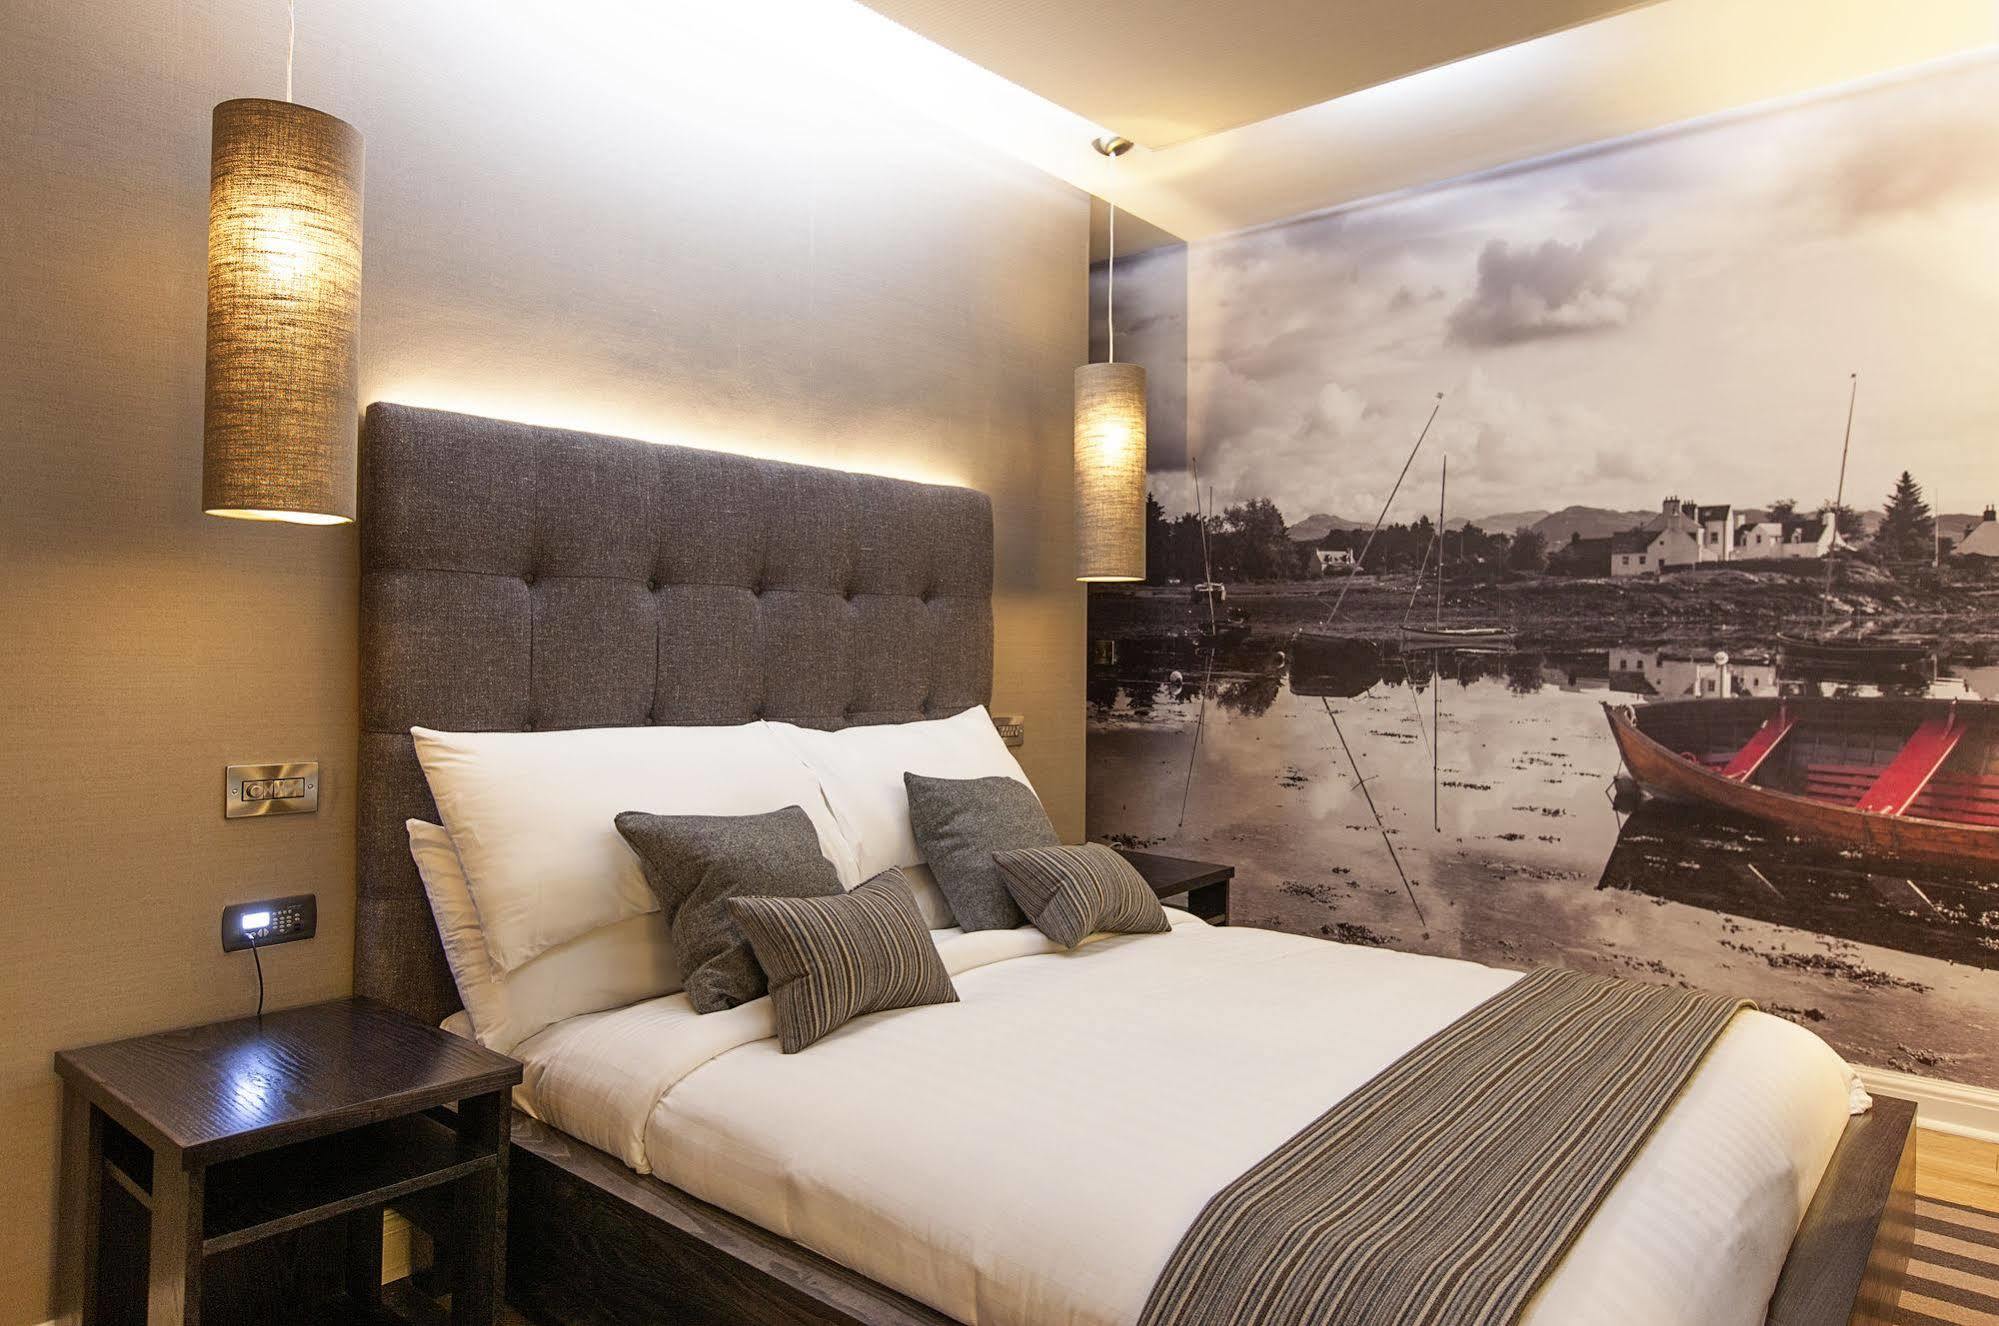 Rooms & Suites Picardy Place เอดินบะระ ภายนอก รูปภาพ